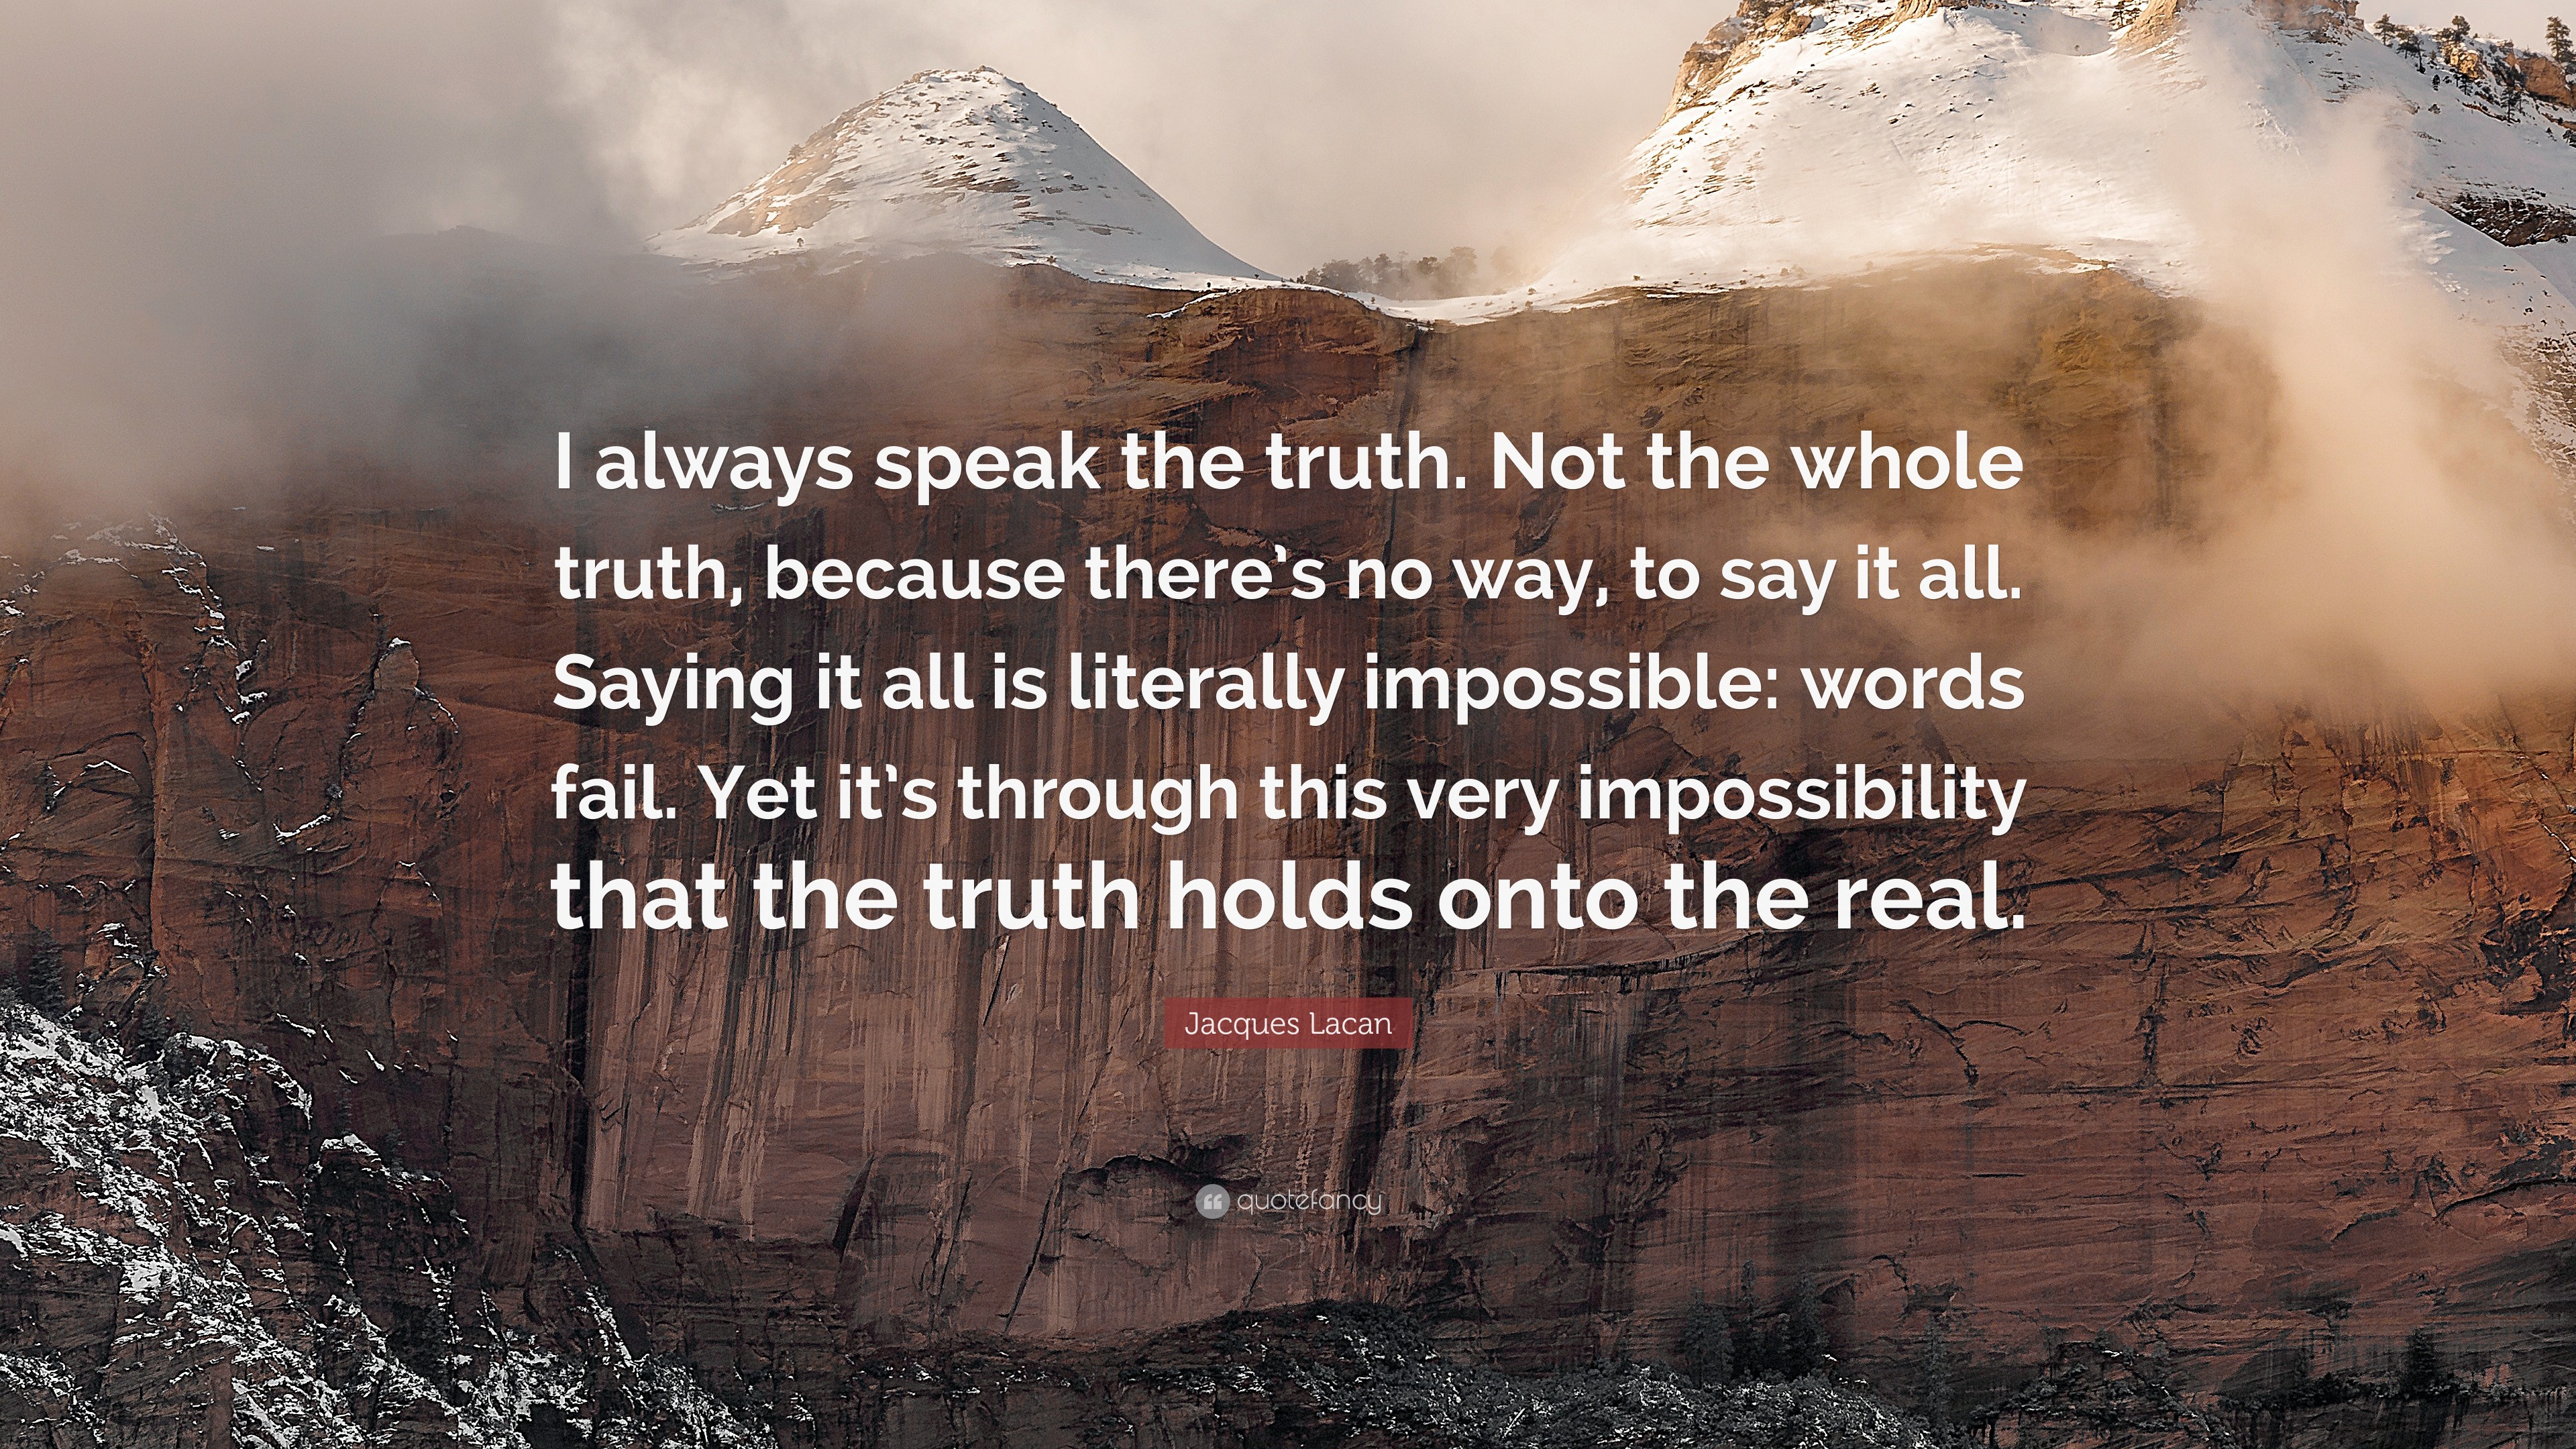 Jacques Lacan Quote “I always speak the truth. Not the whole truth